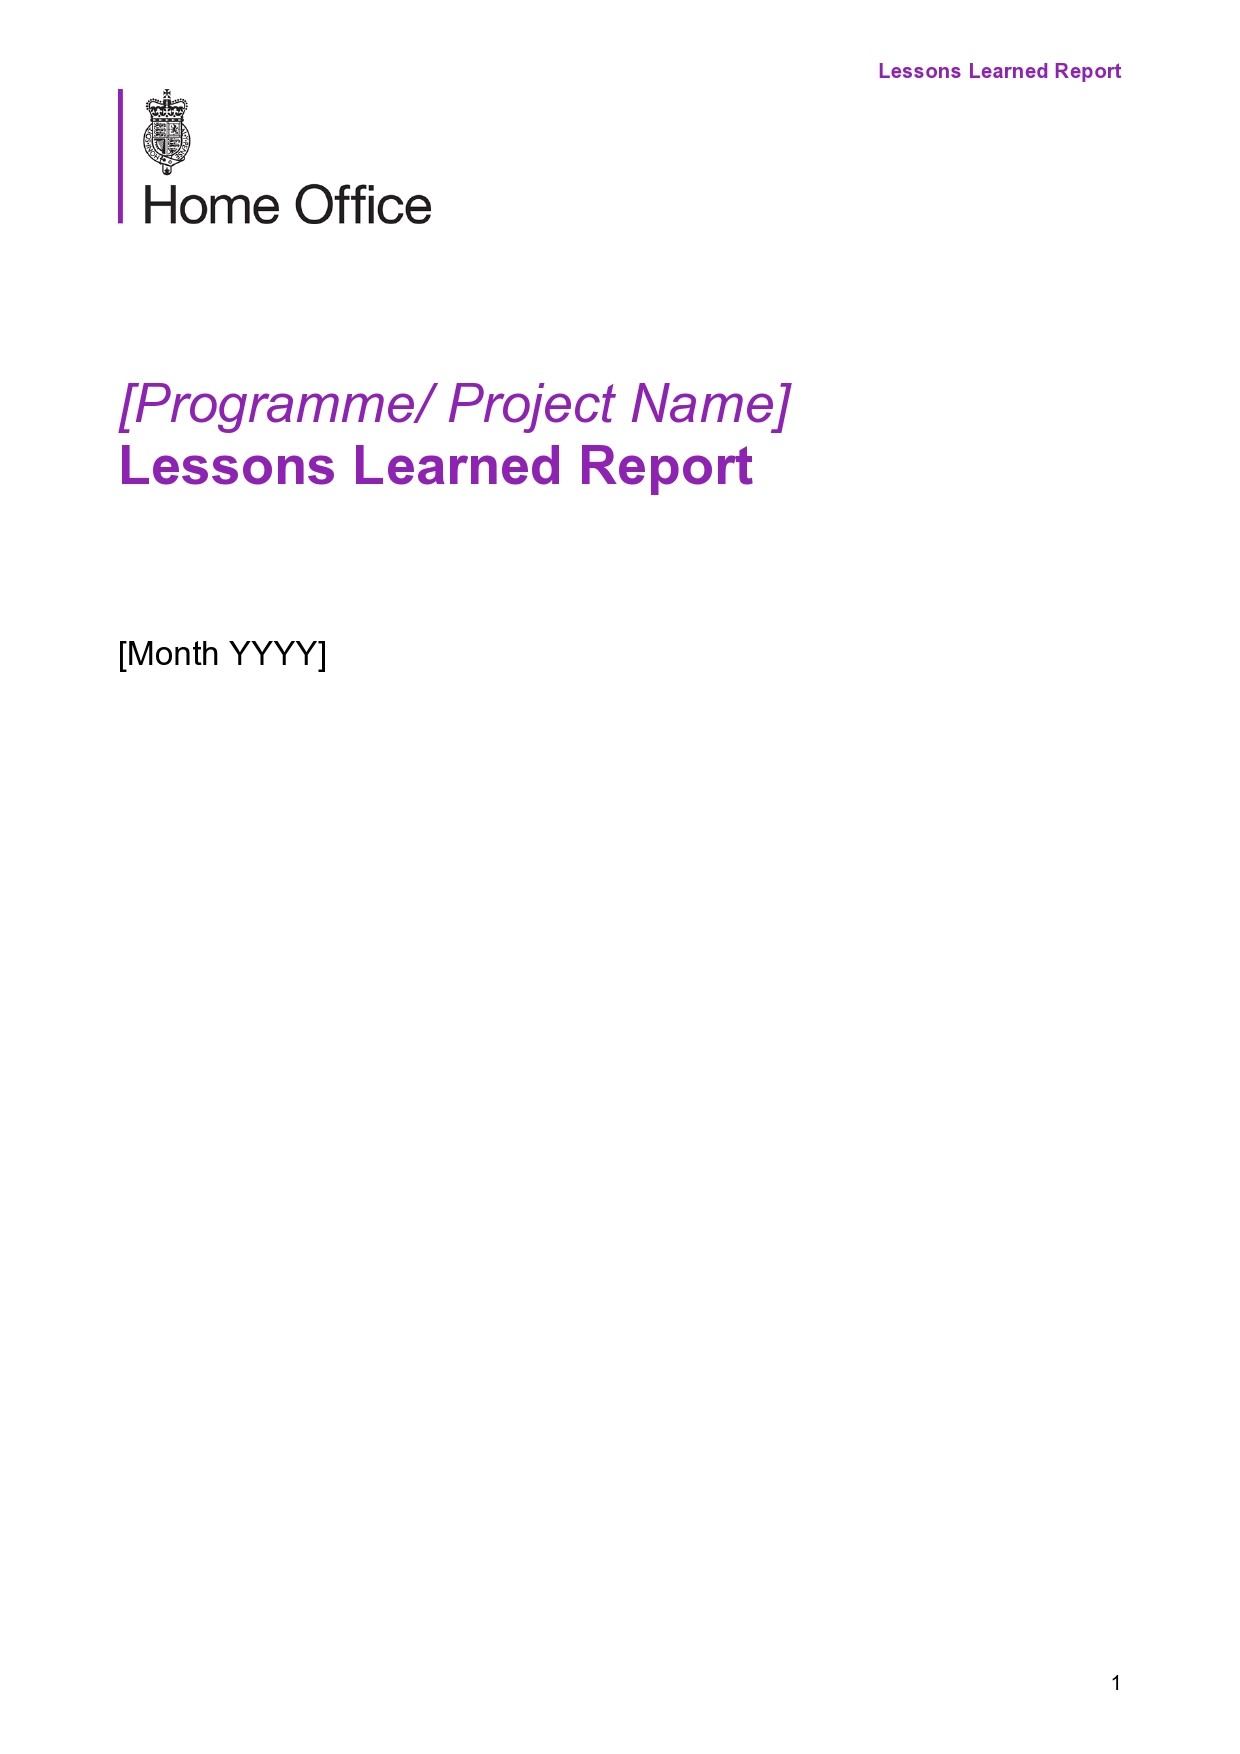 Free lessons learned template 17